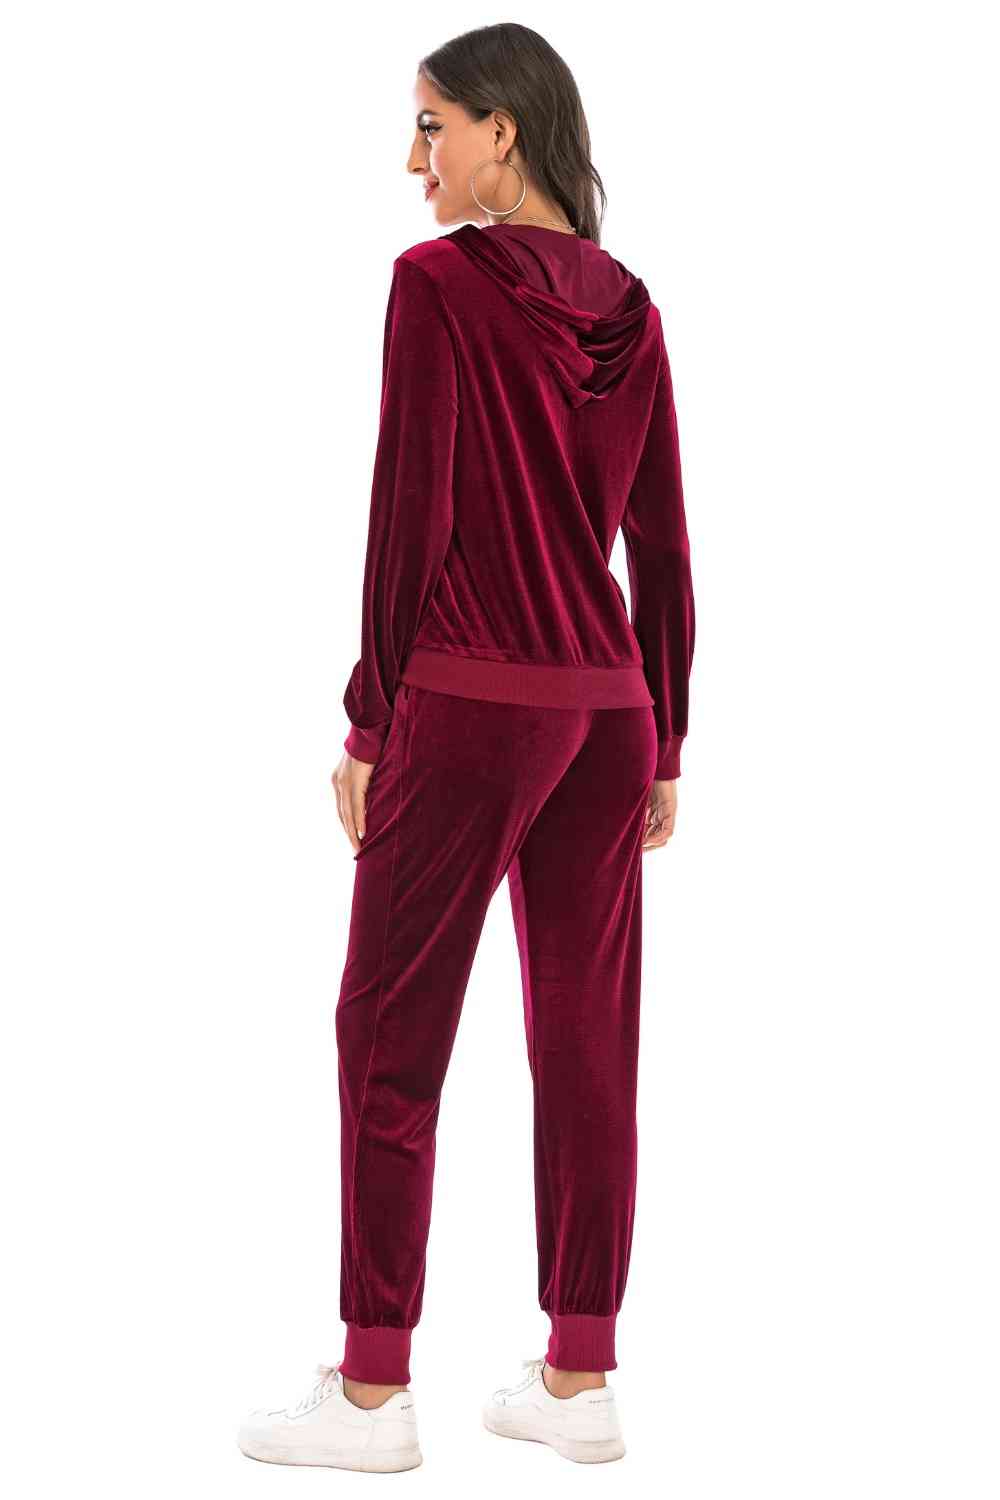 Dark Red Zip-Up Hooded Jacket and Pants Set New Year Looks